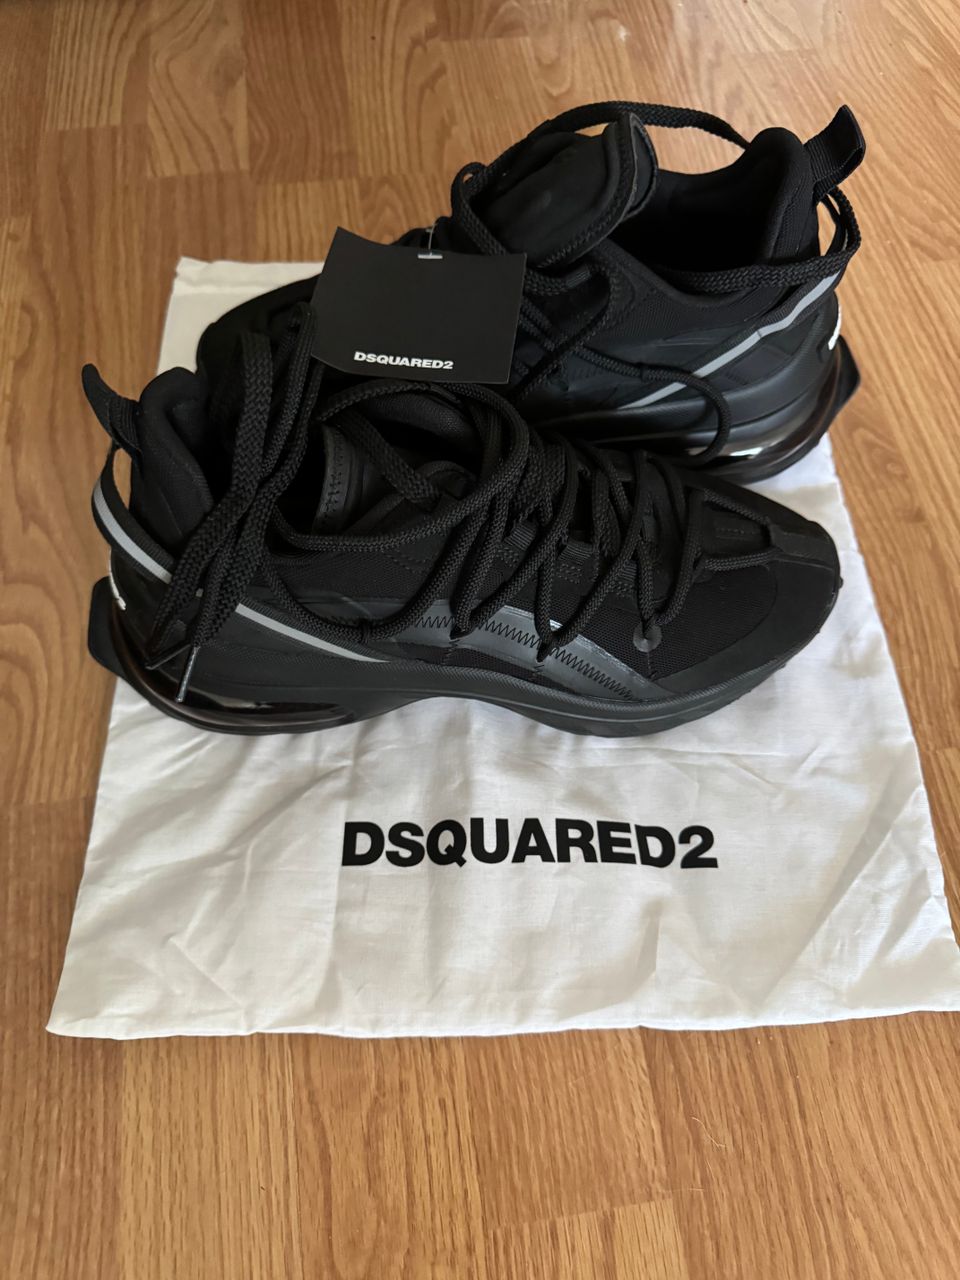 DSQUARED2 ‘Bubble’ sneakers